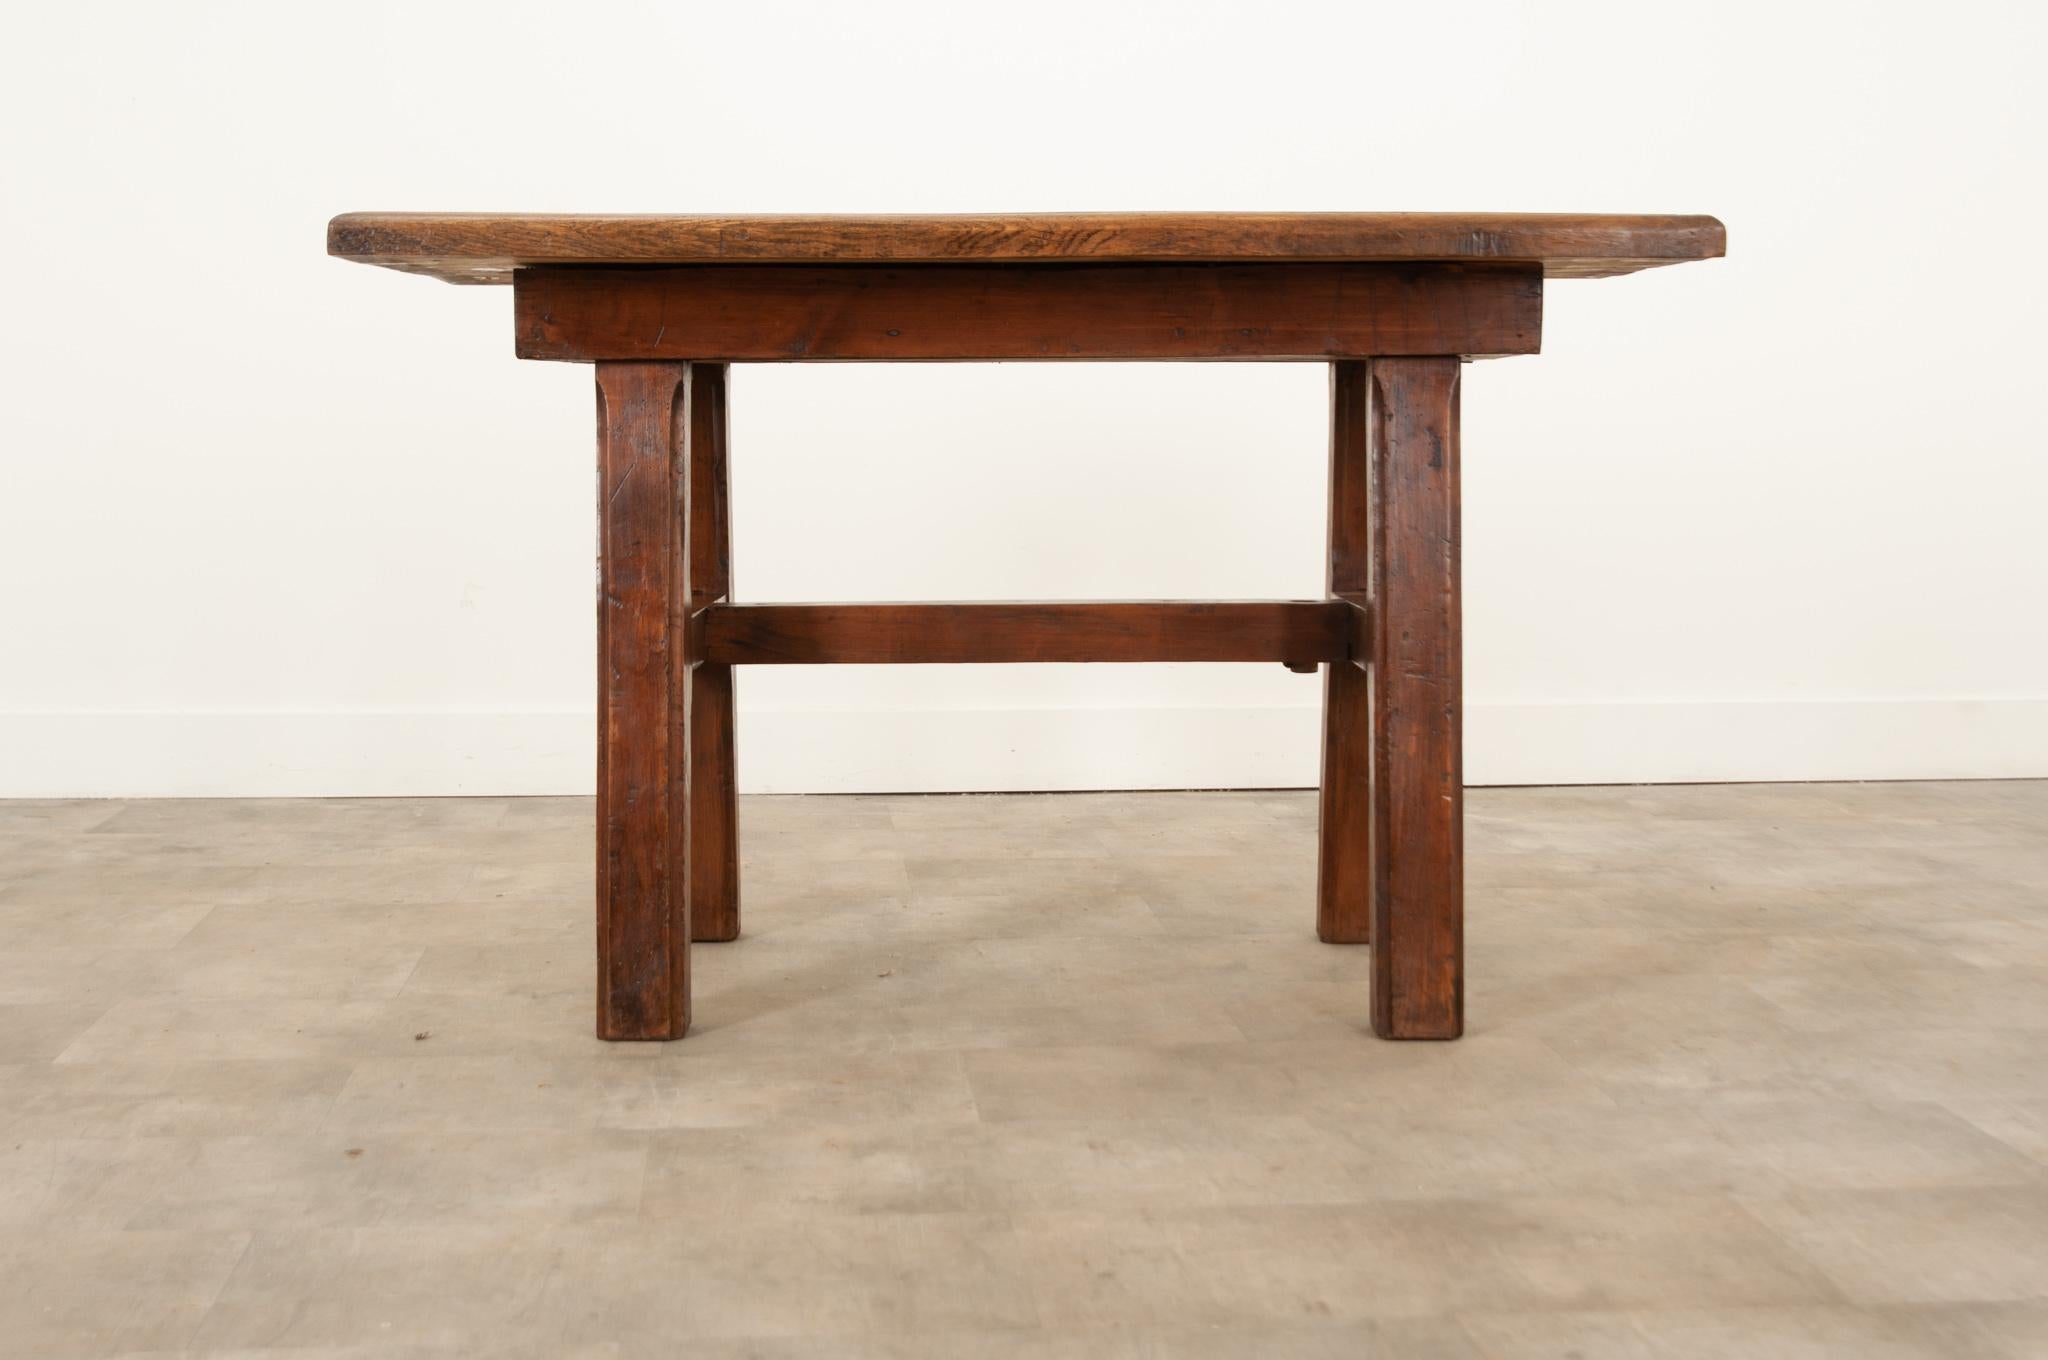 A robust French 19th century solid oak work table handcrafted in France circa 1870. The two inch thick top is made up of five planks with a molded and trimmed edge that overhangs a simple apron supported by thick A-framed and decoratively chamfered